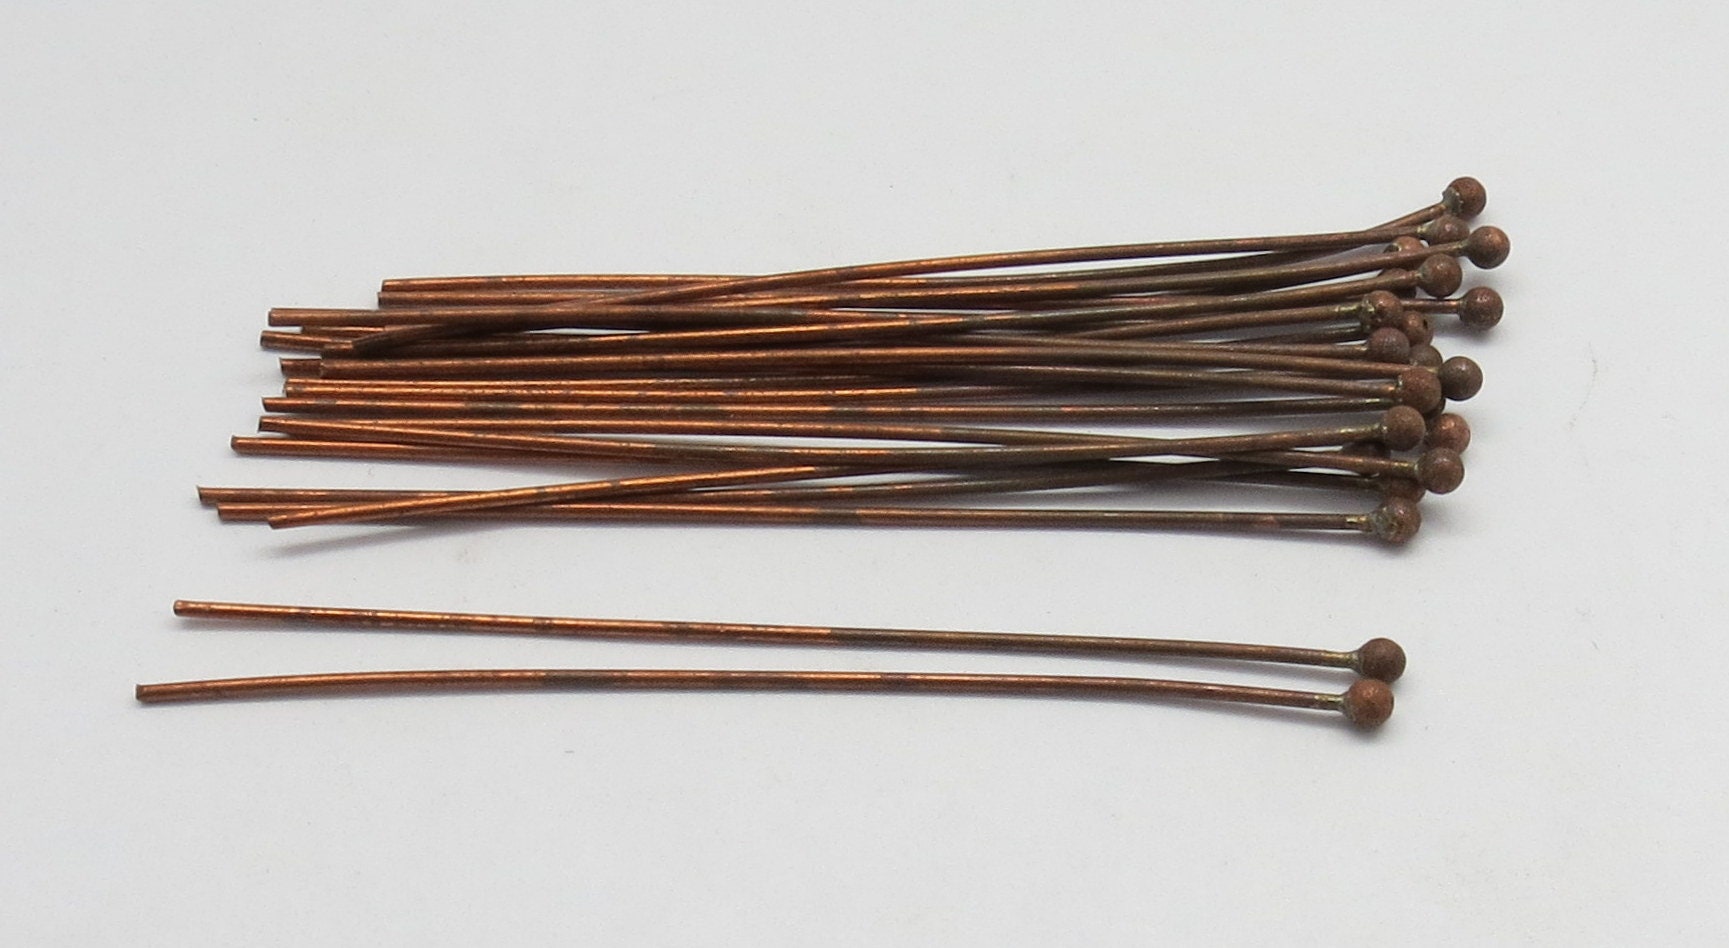 10 Pieces Antique Copper Headpin 22 gauge wire Jewelry Making Headpin 75mm  Long